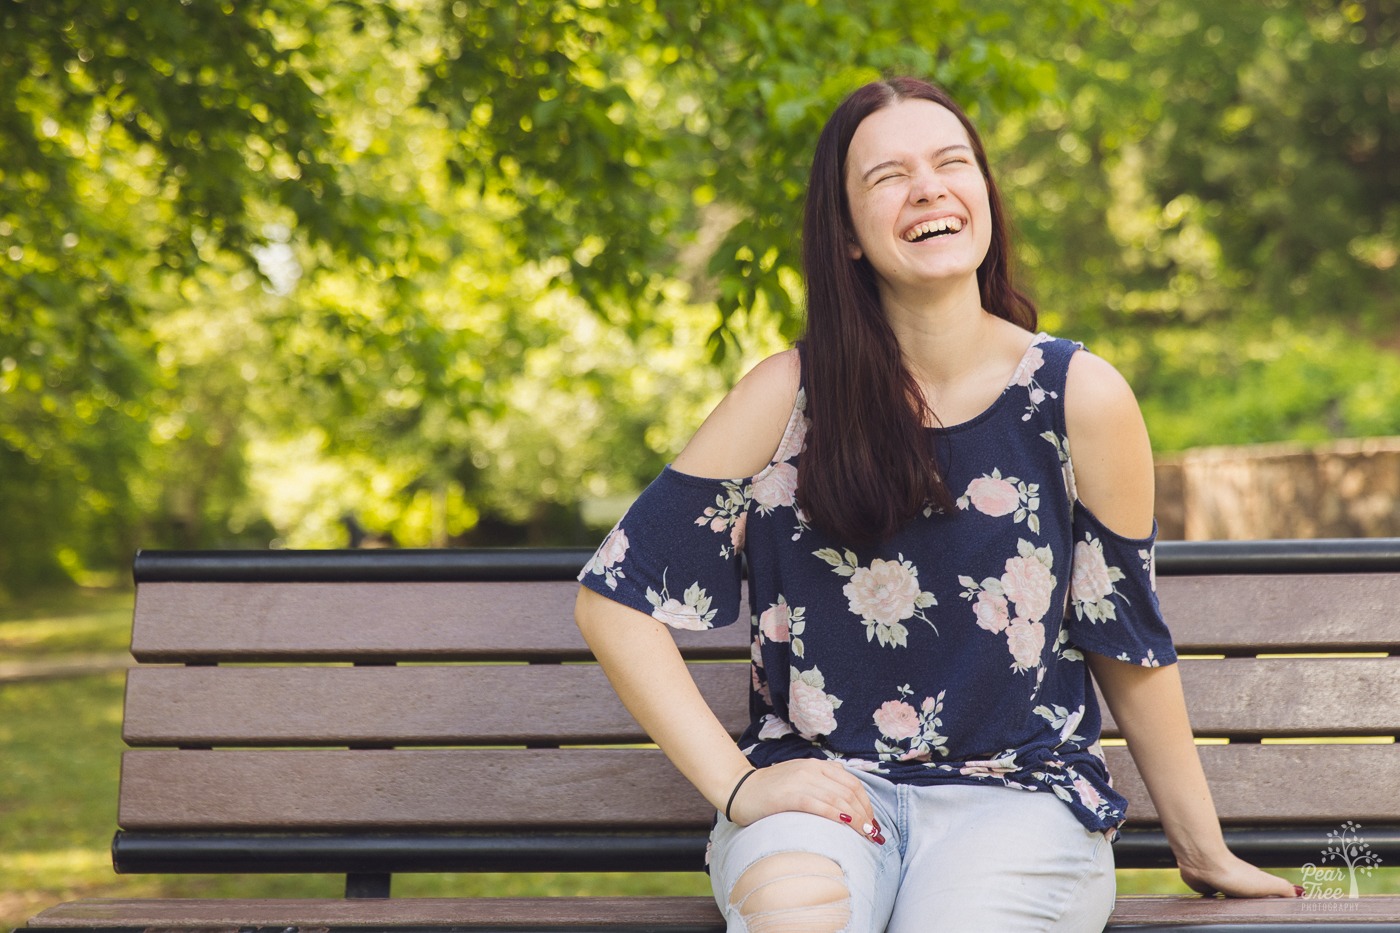 Laughing high school senior sitting on a park bench with trees in the background